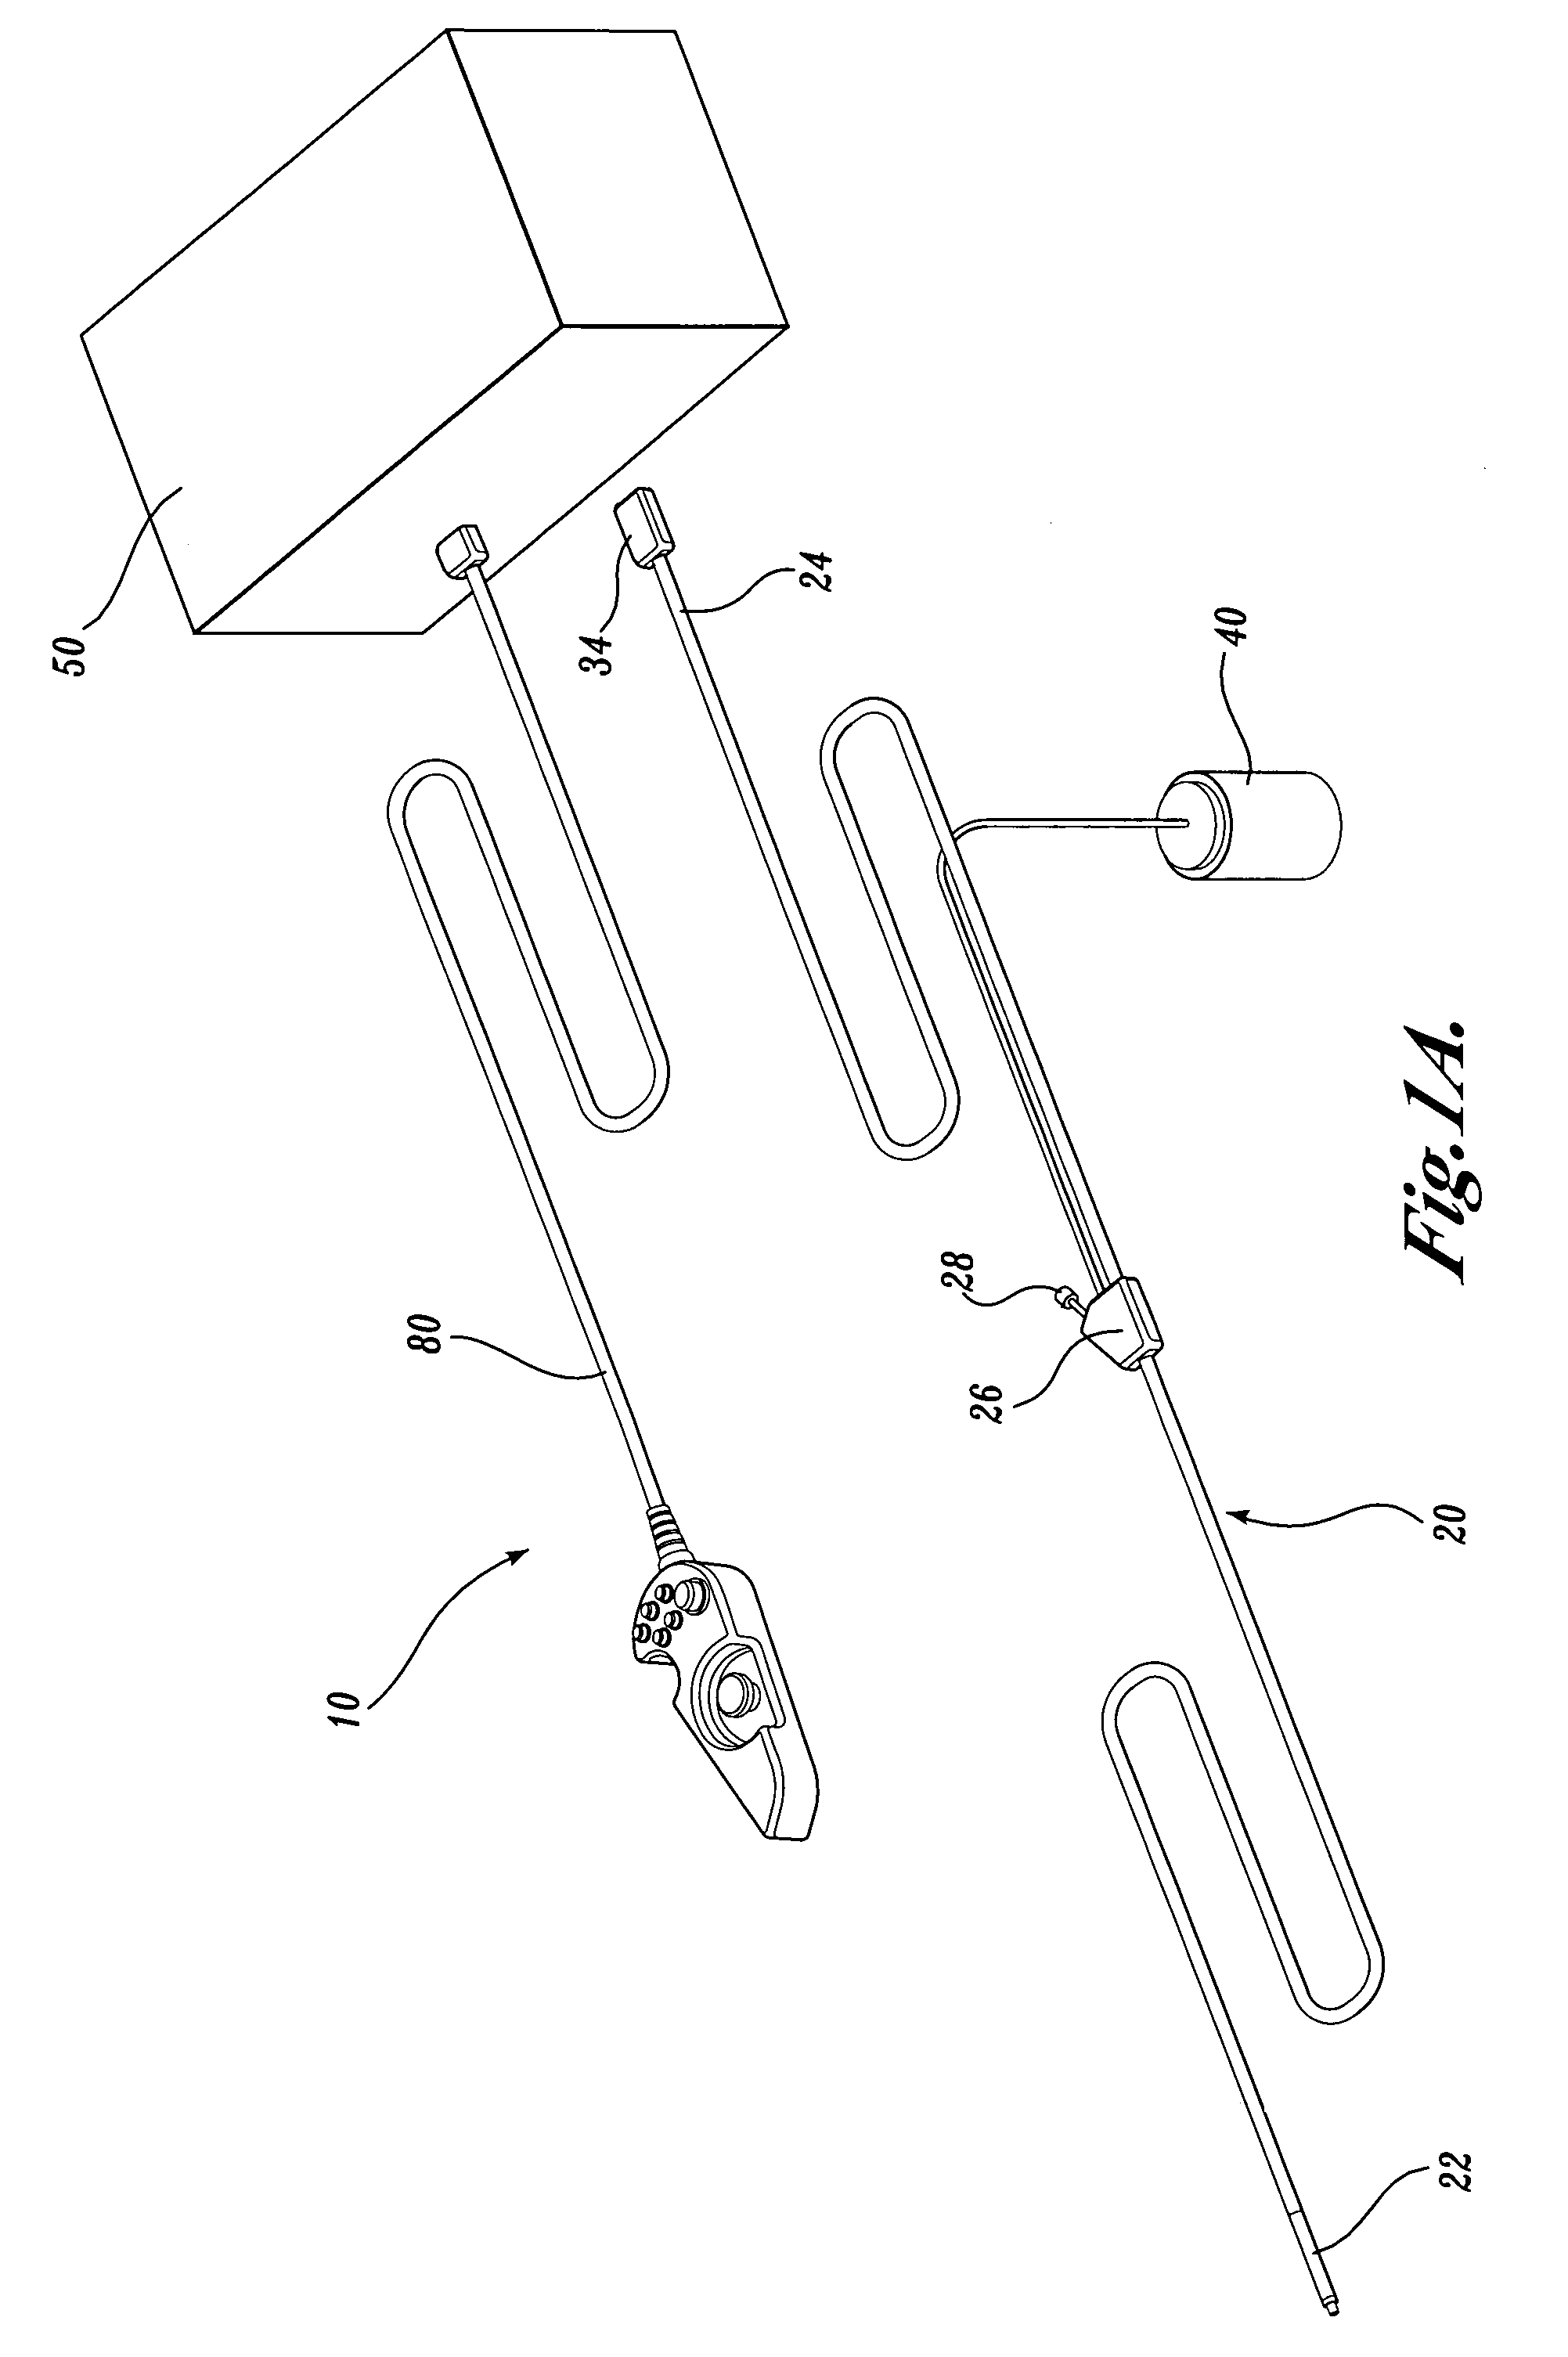 Endoscope with actively cooled illumination sources